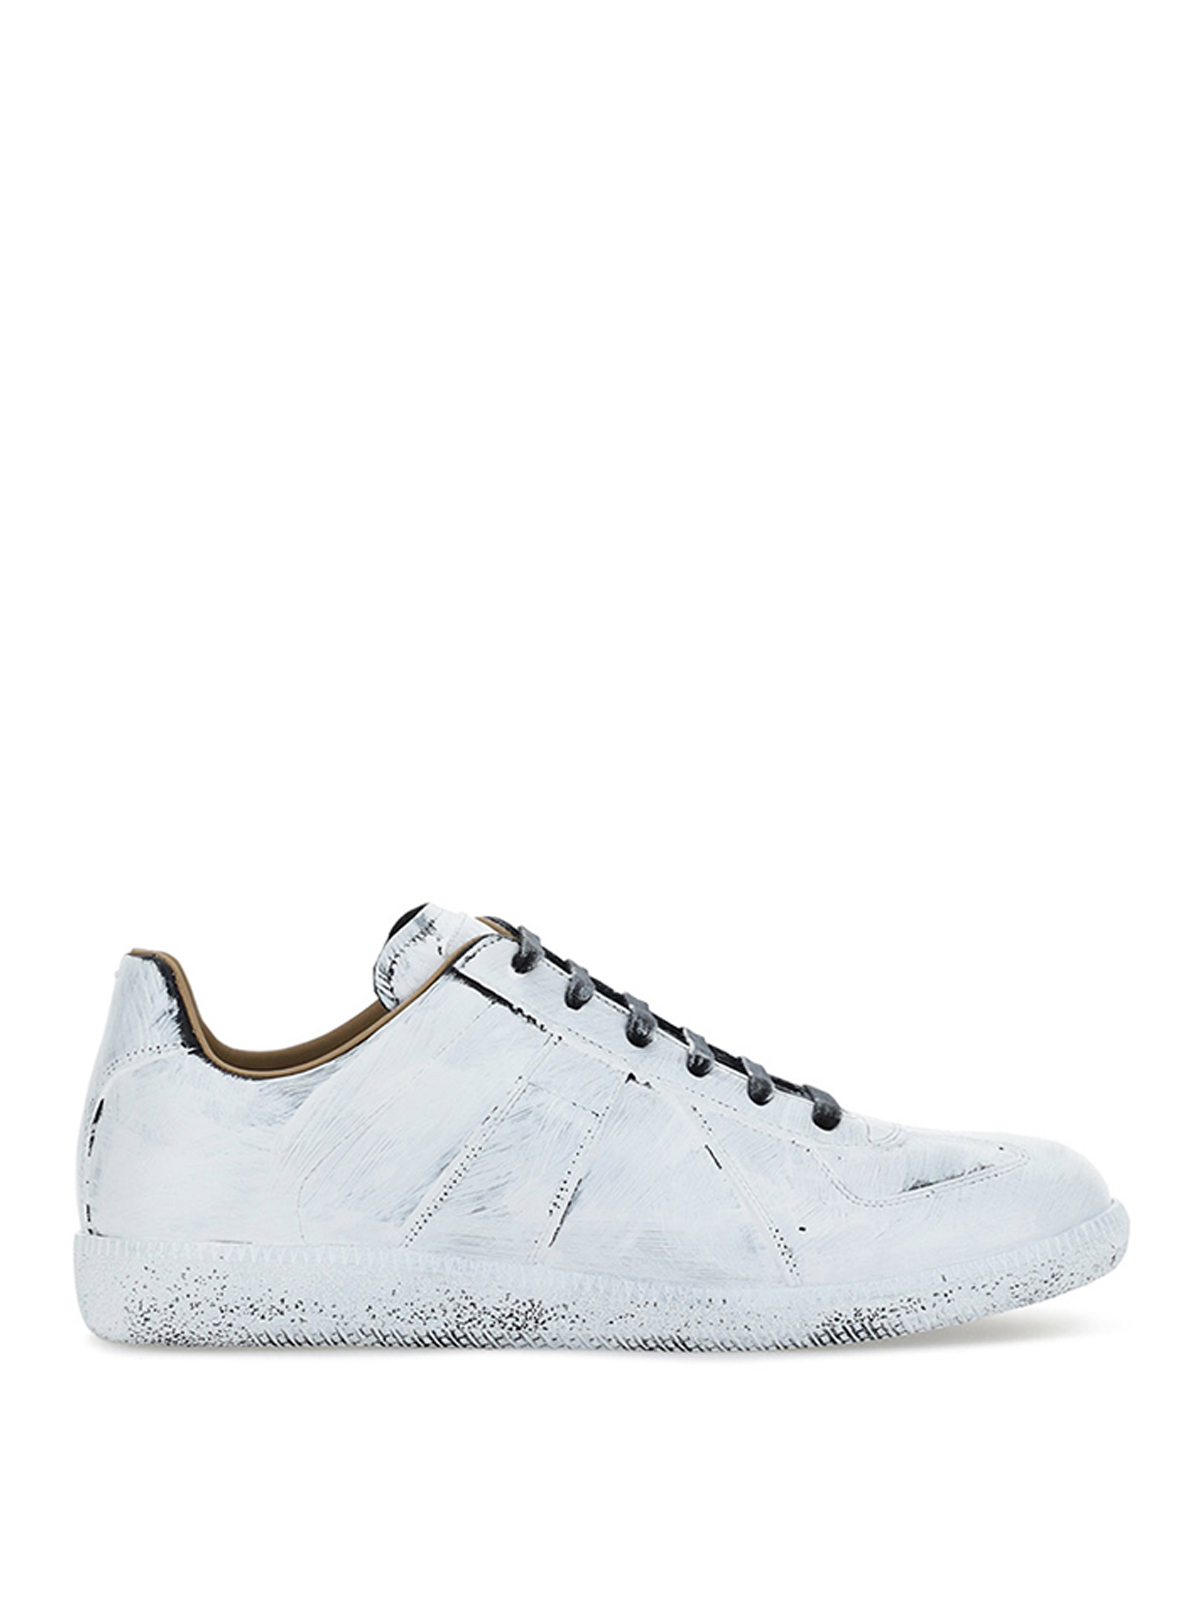 Maison Margiela Used Effect Trainers In Blanco